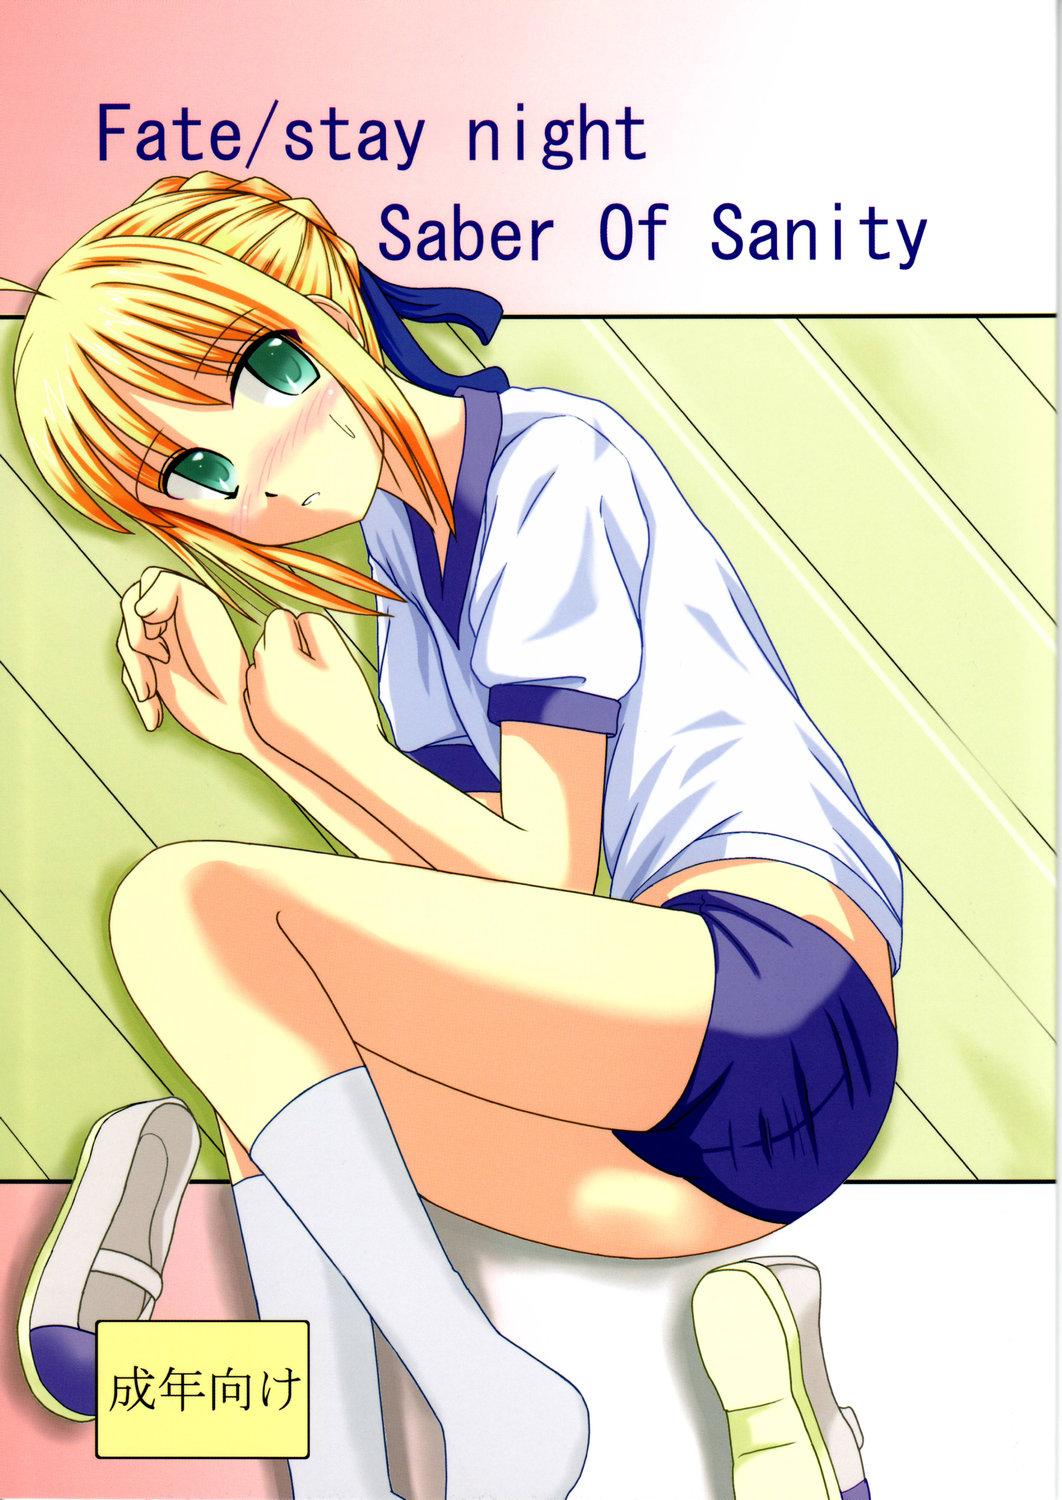 Gay Oralsex Saber Of Sanity - Fate stay night Ruiva - Picture 1